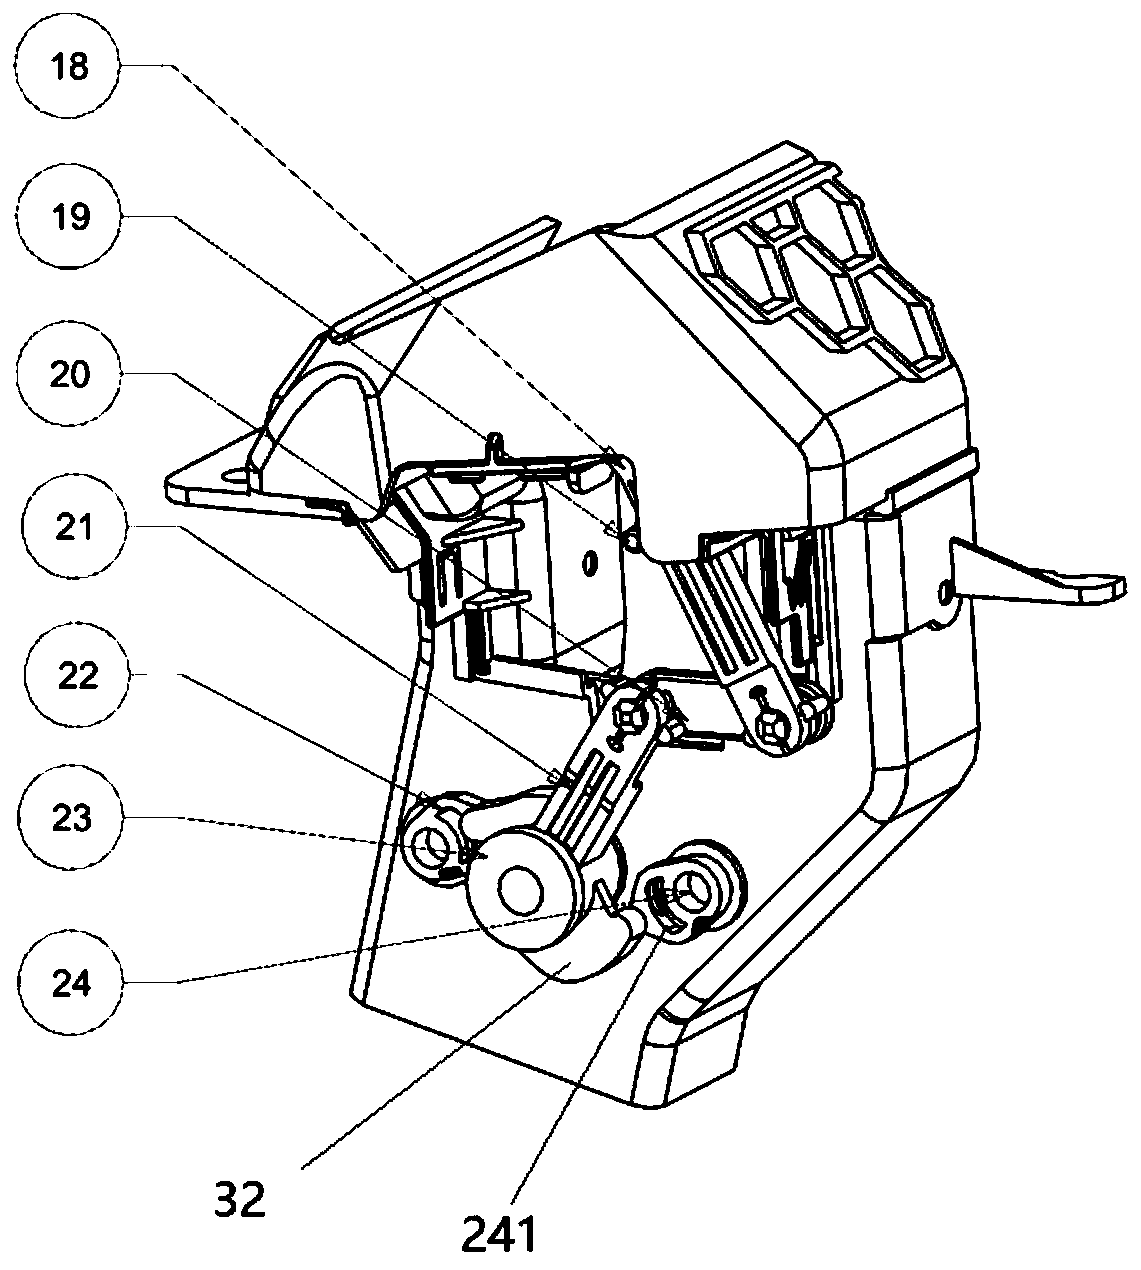 Asynchronous double-ventilation-door concealed air conditioner air outlet structure and motor vehicle